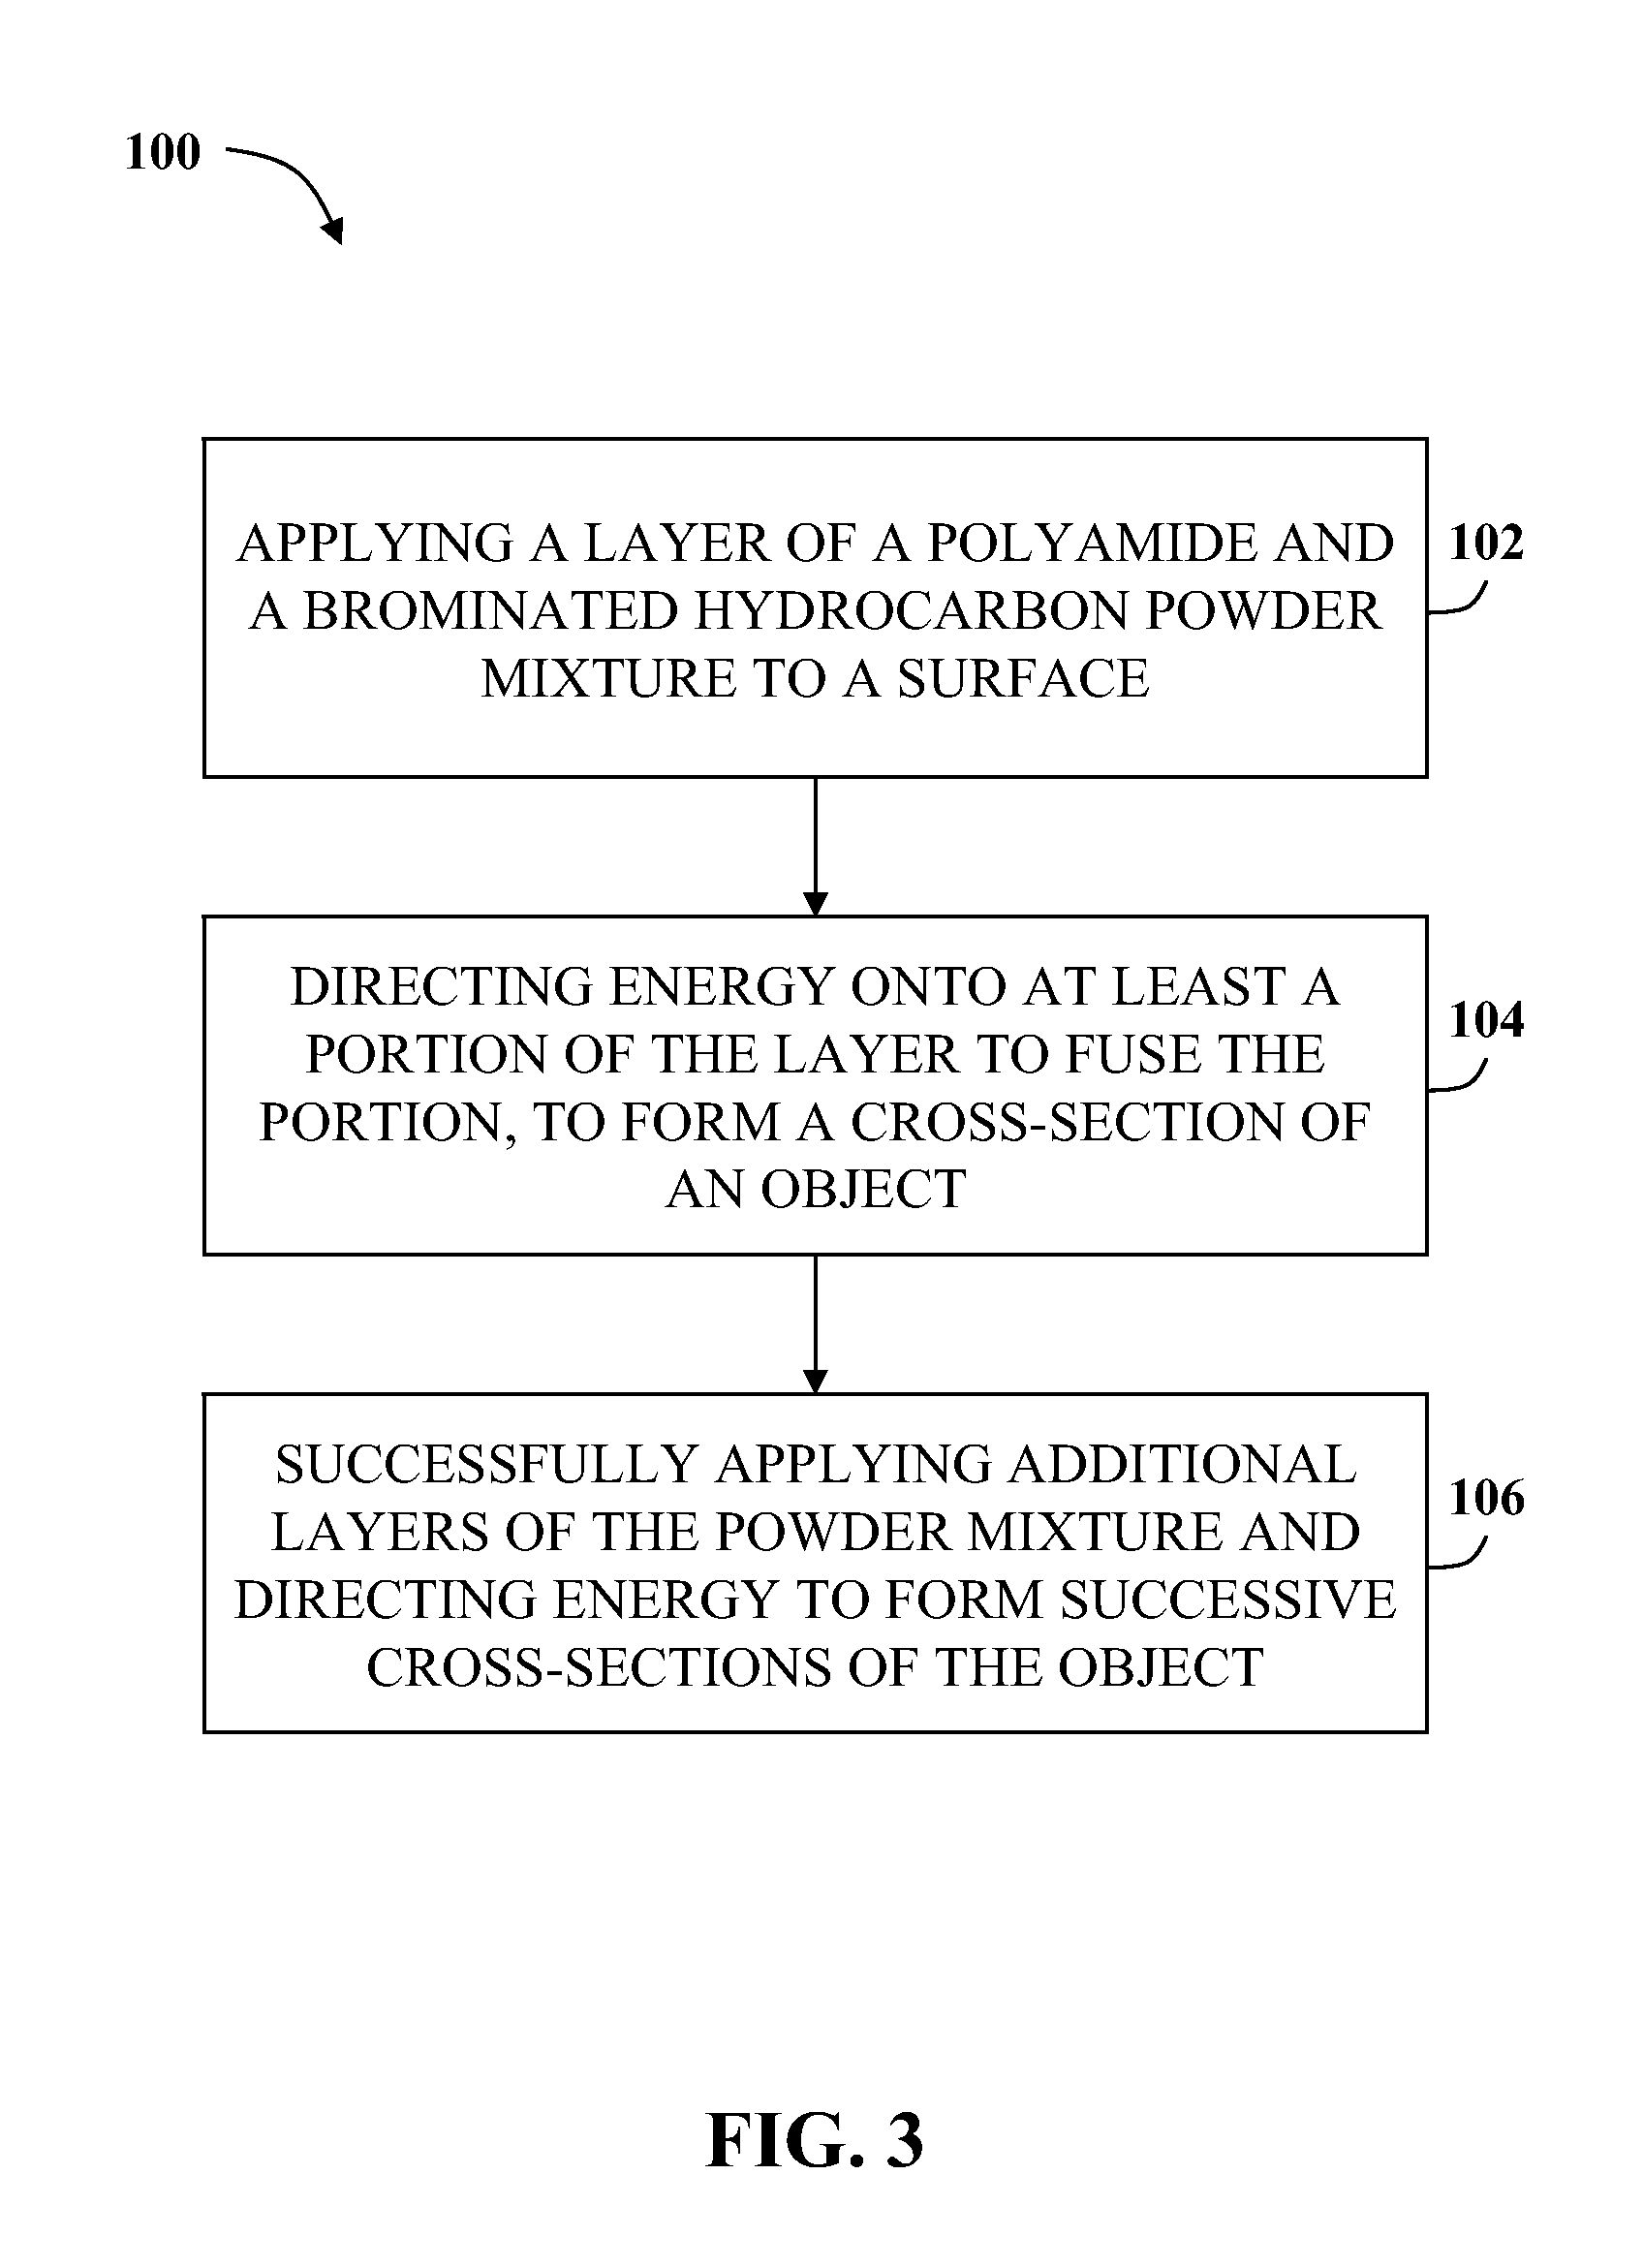 Methods and Systems for Fabricating Fire Retardant Materials